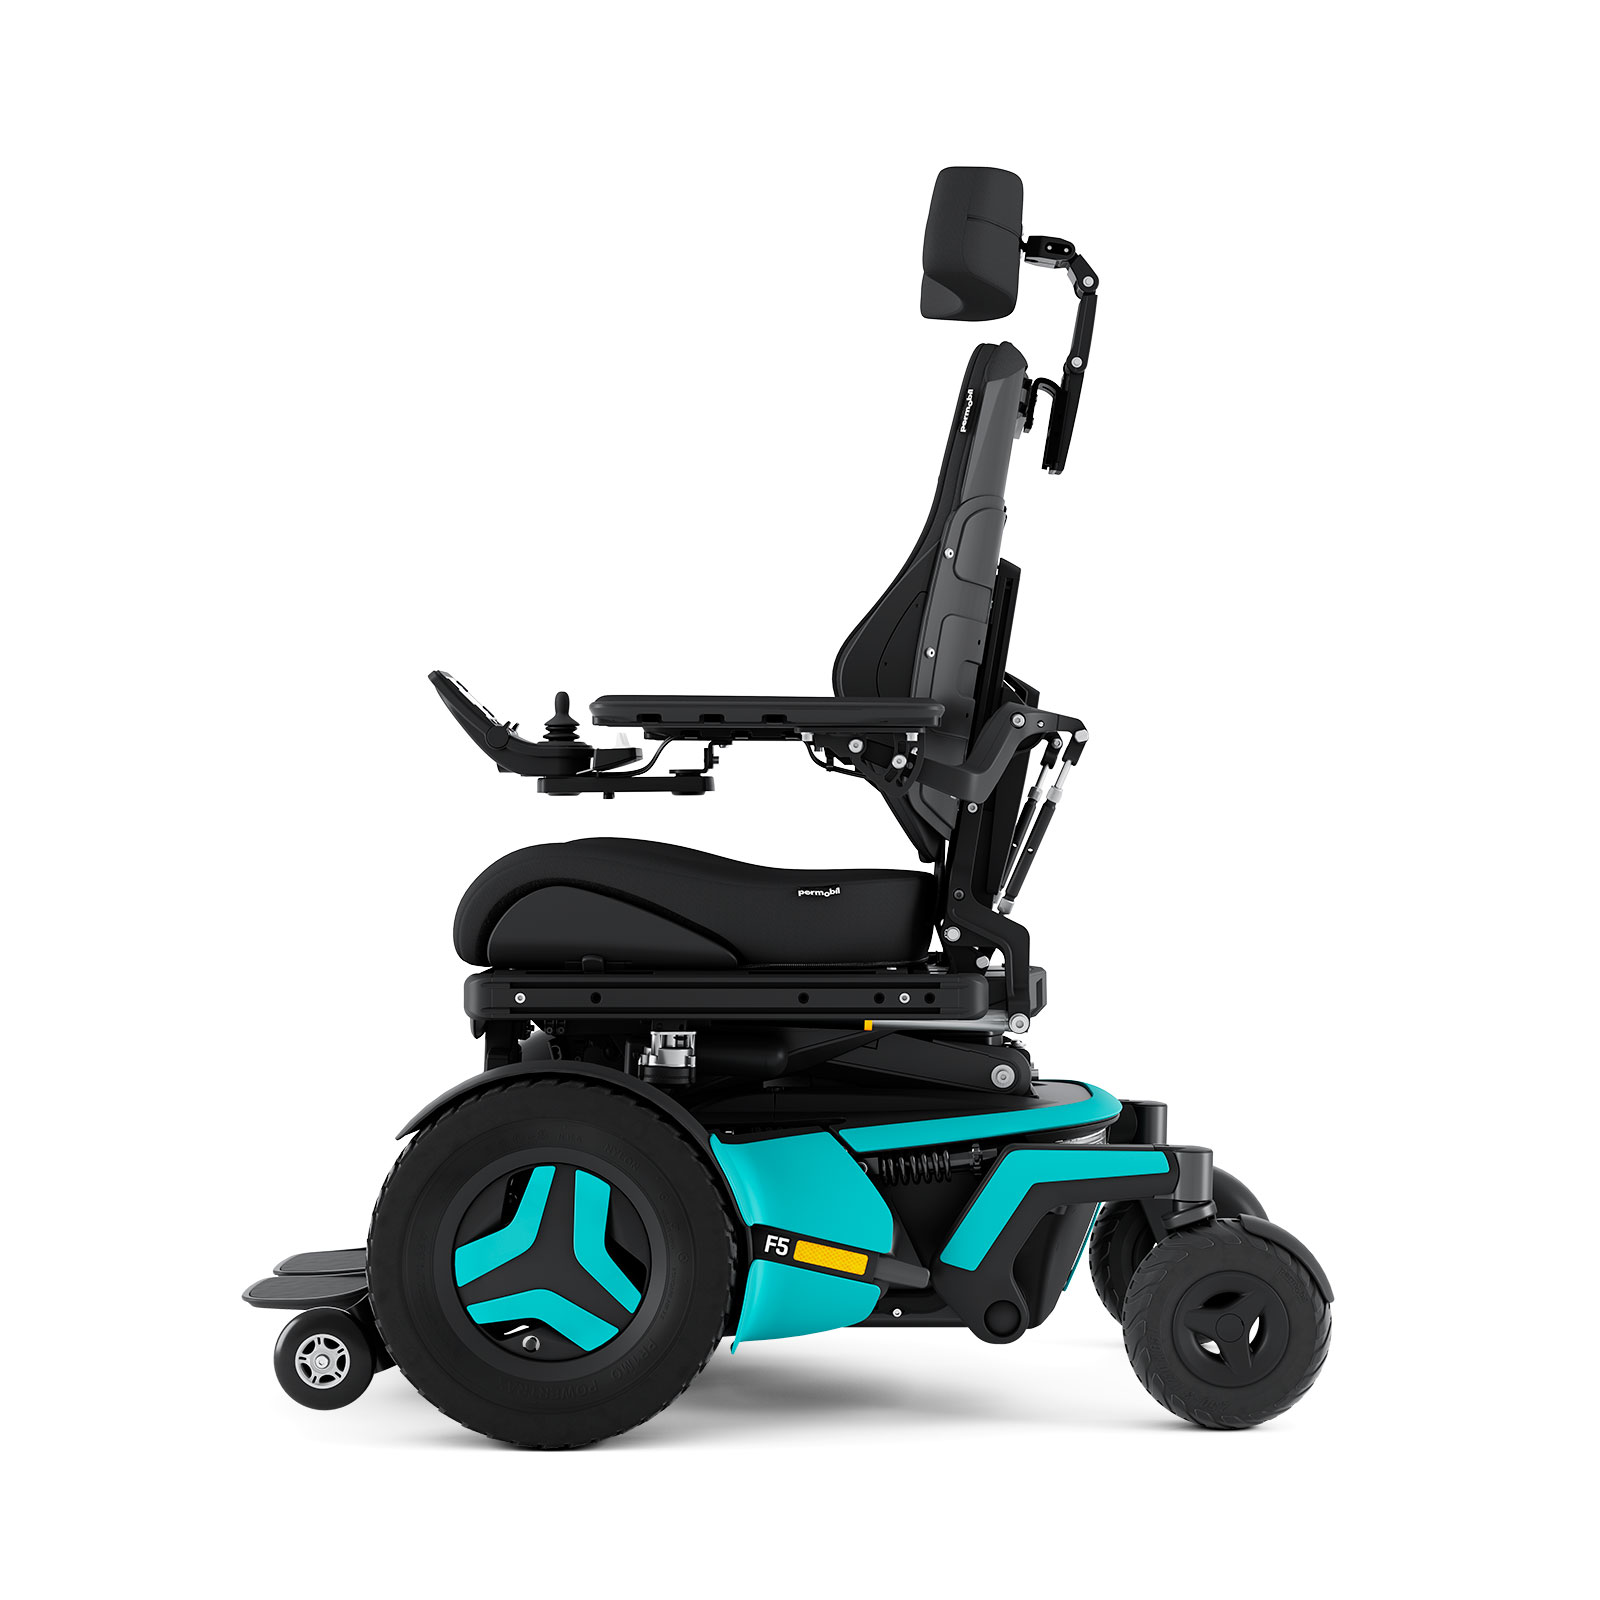 The Corpus F5 power chair with light blue accents is shown from the side. It has black rehab seating including a headrest.